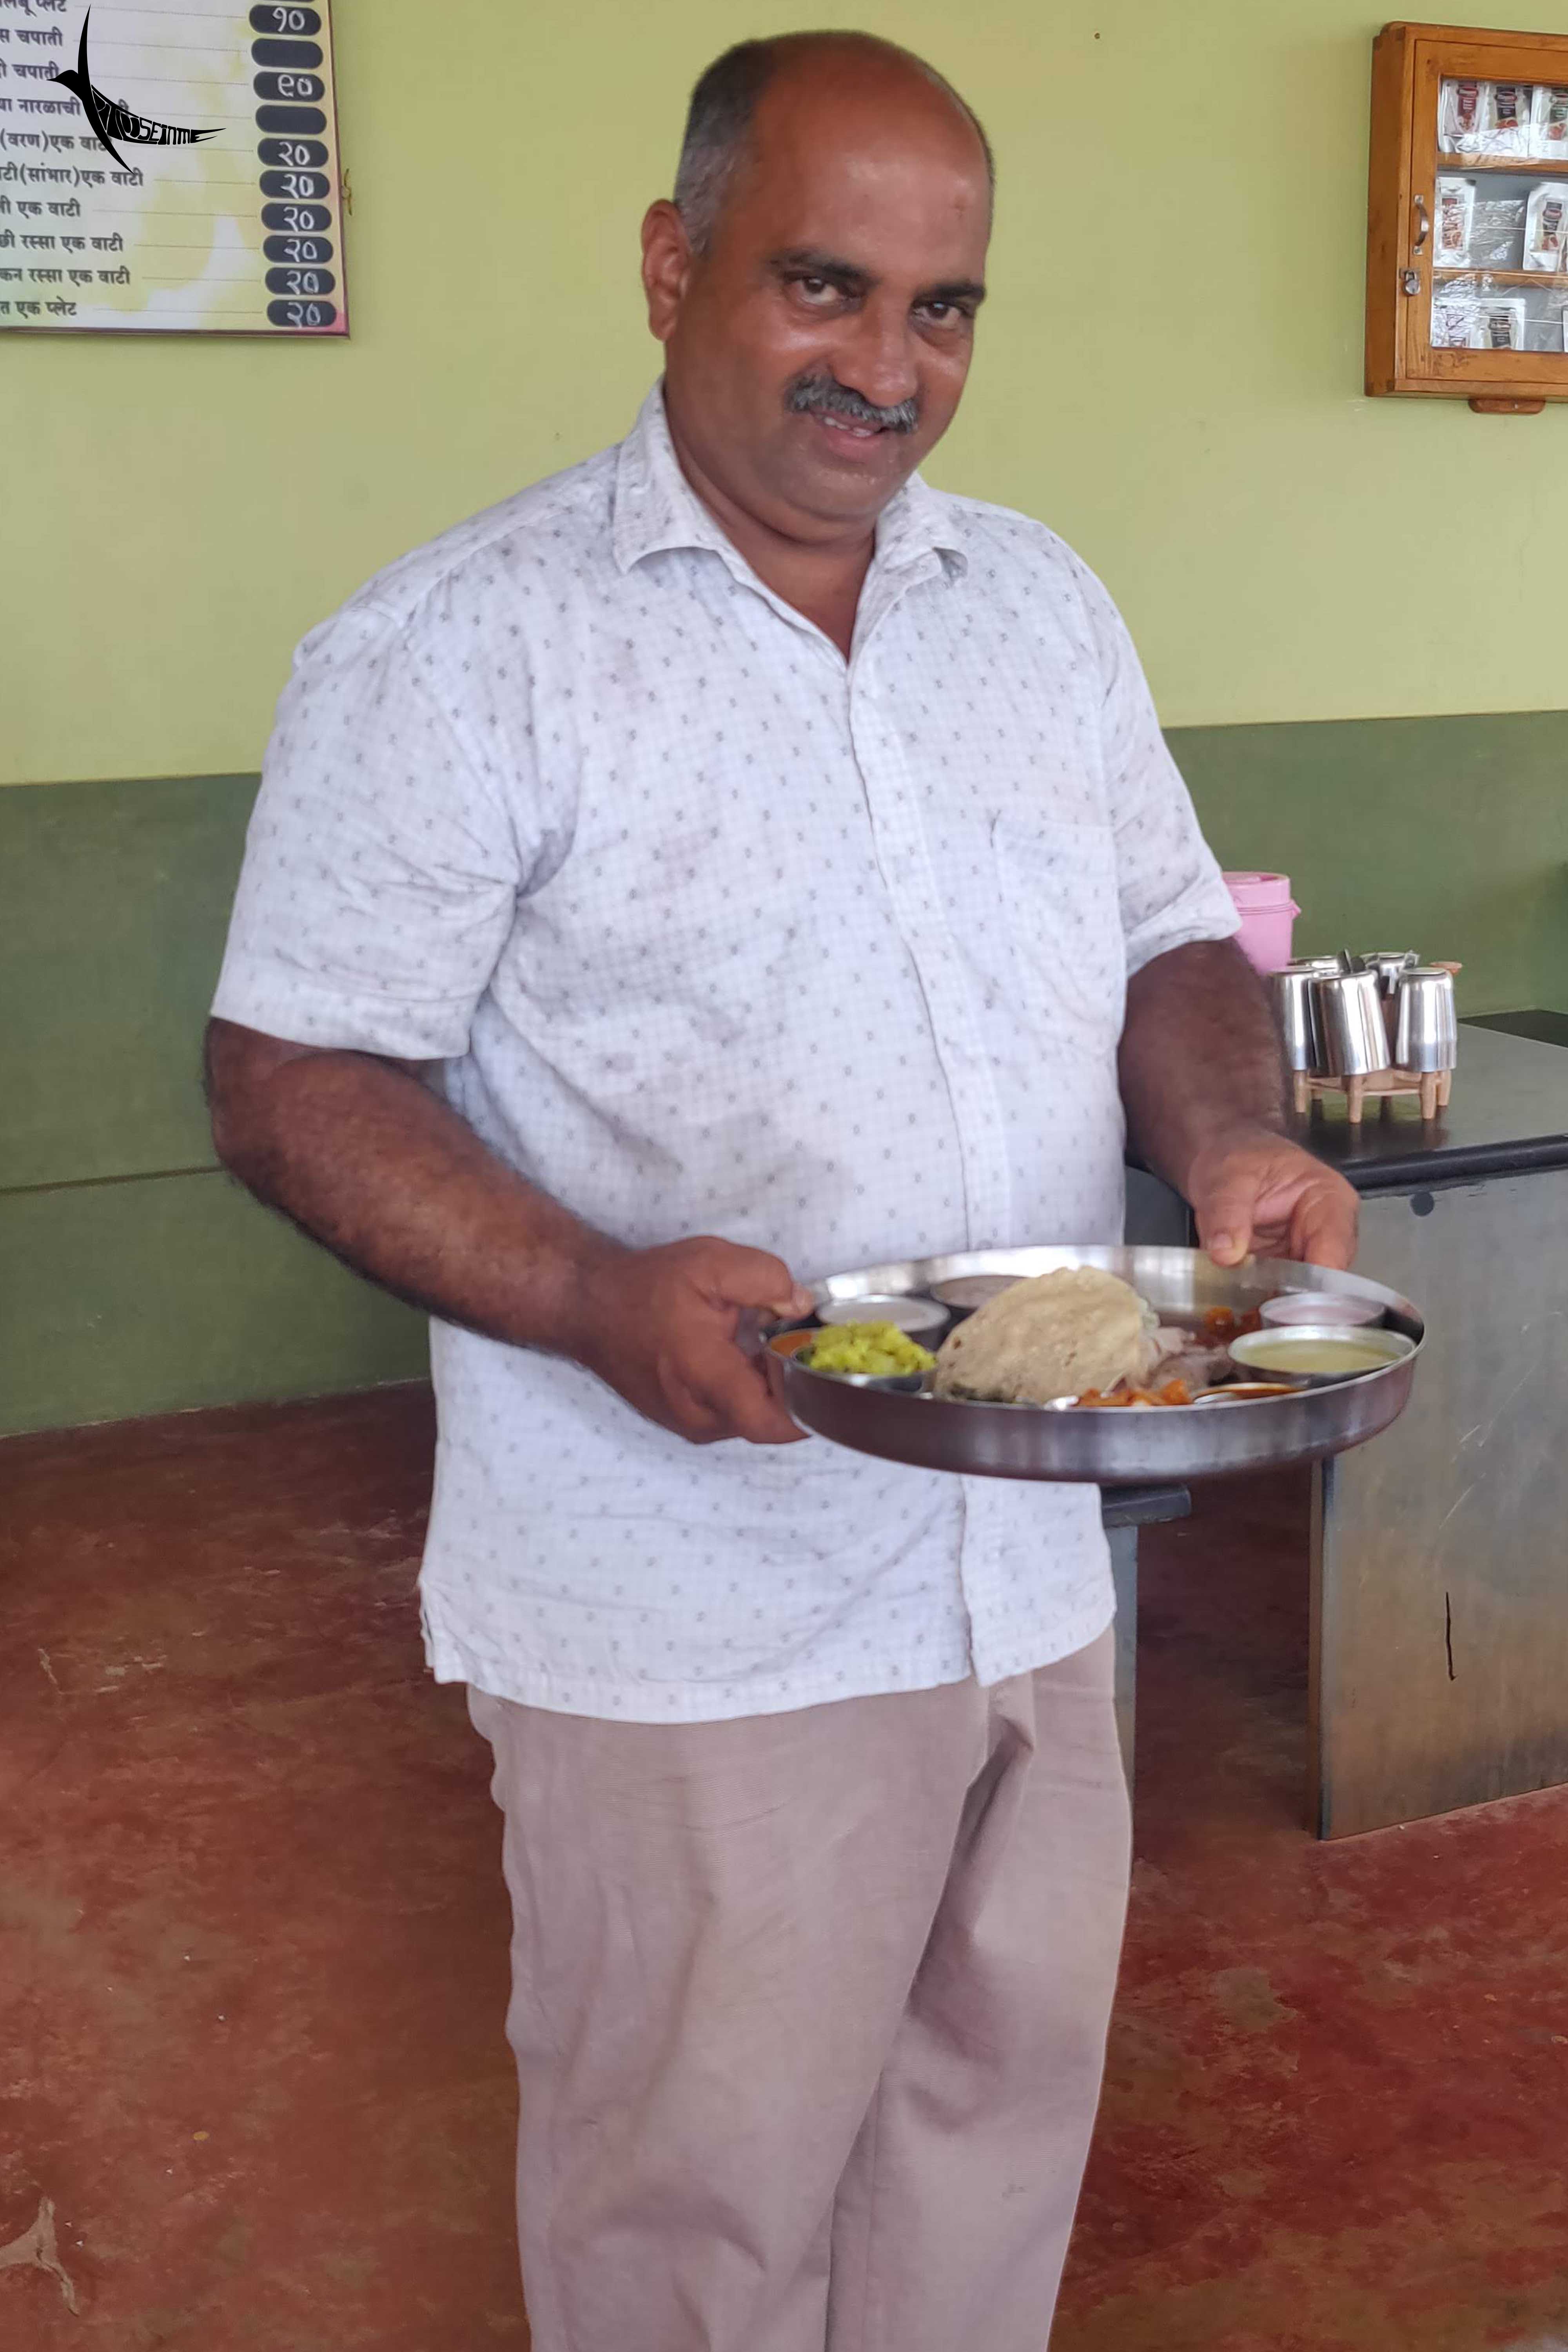 The man with the thali